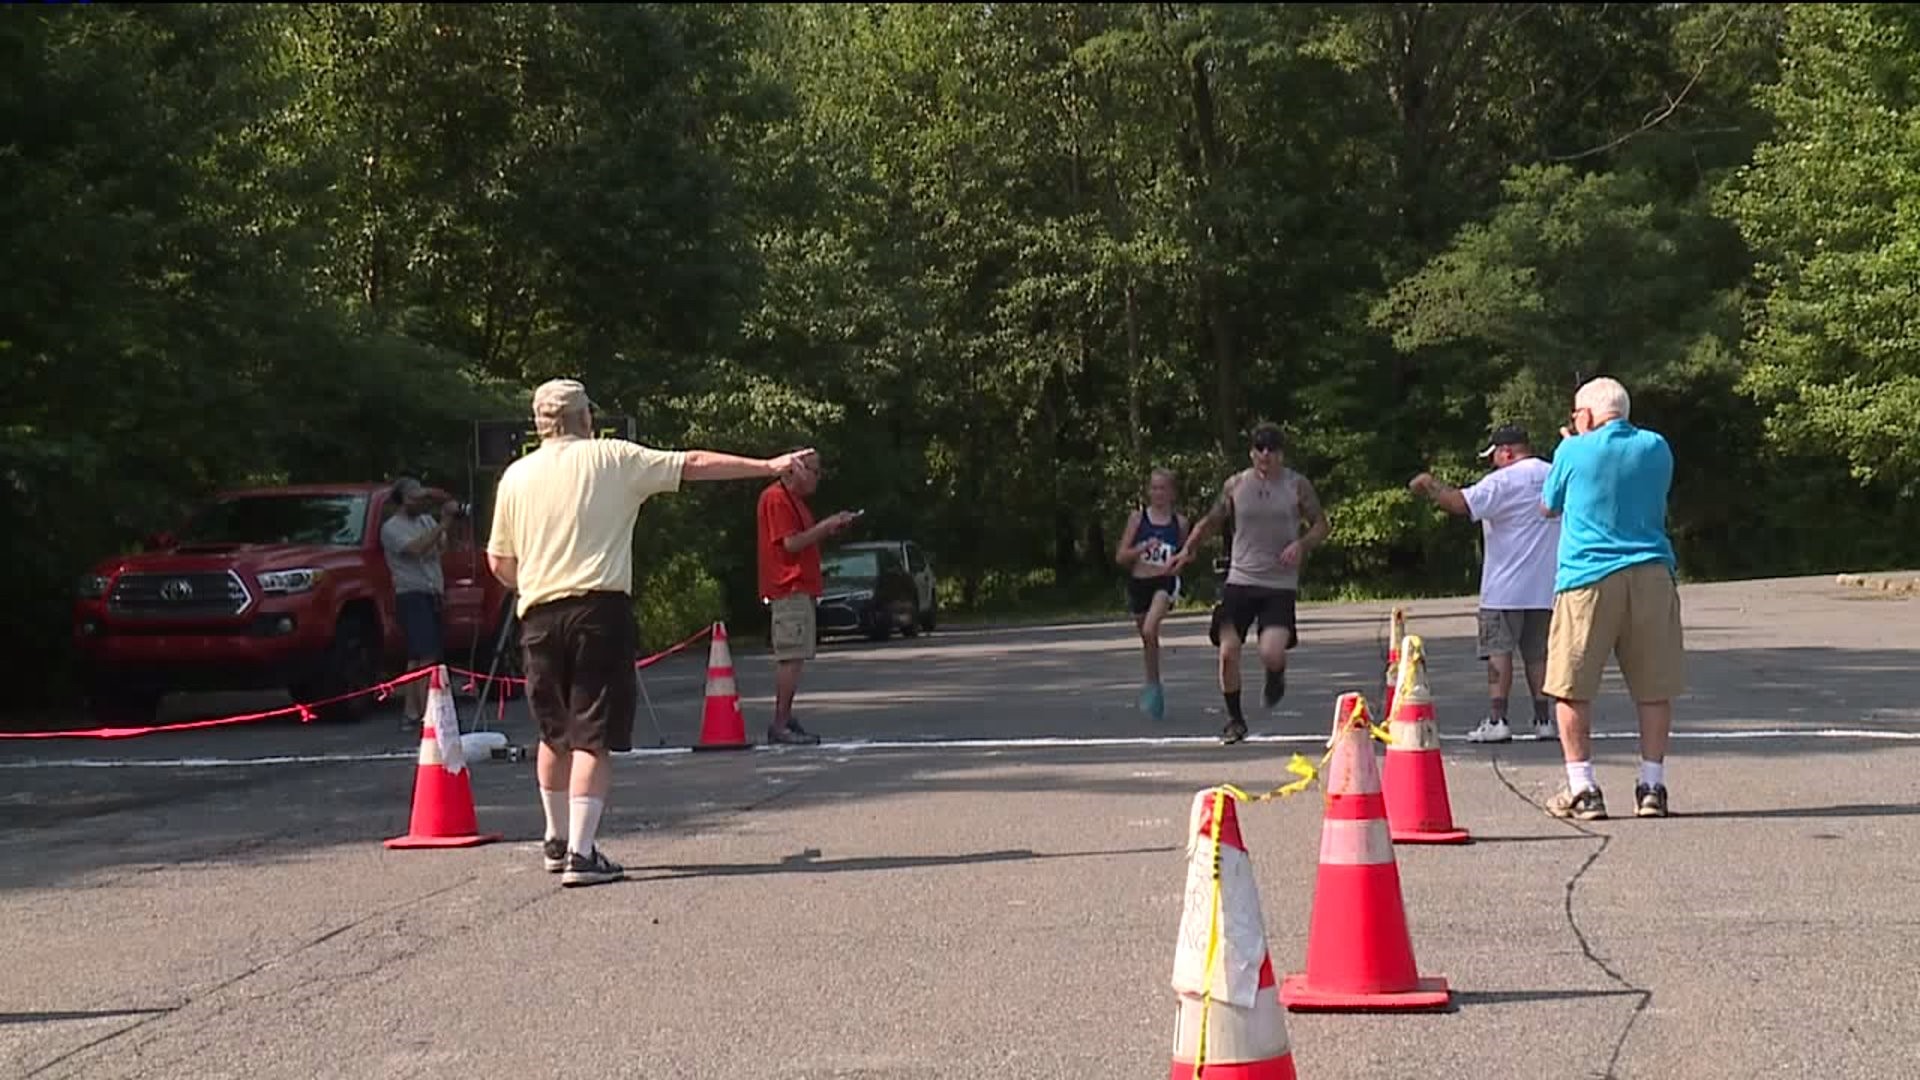 Hook O'Malley 5K Helps Fund Fight Against Cancer